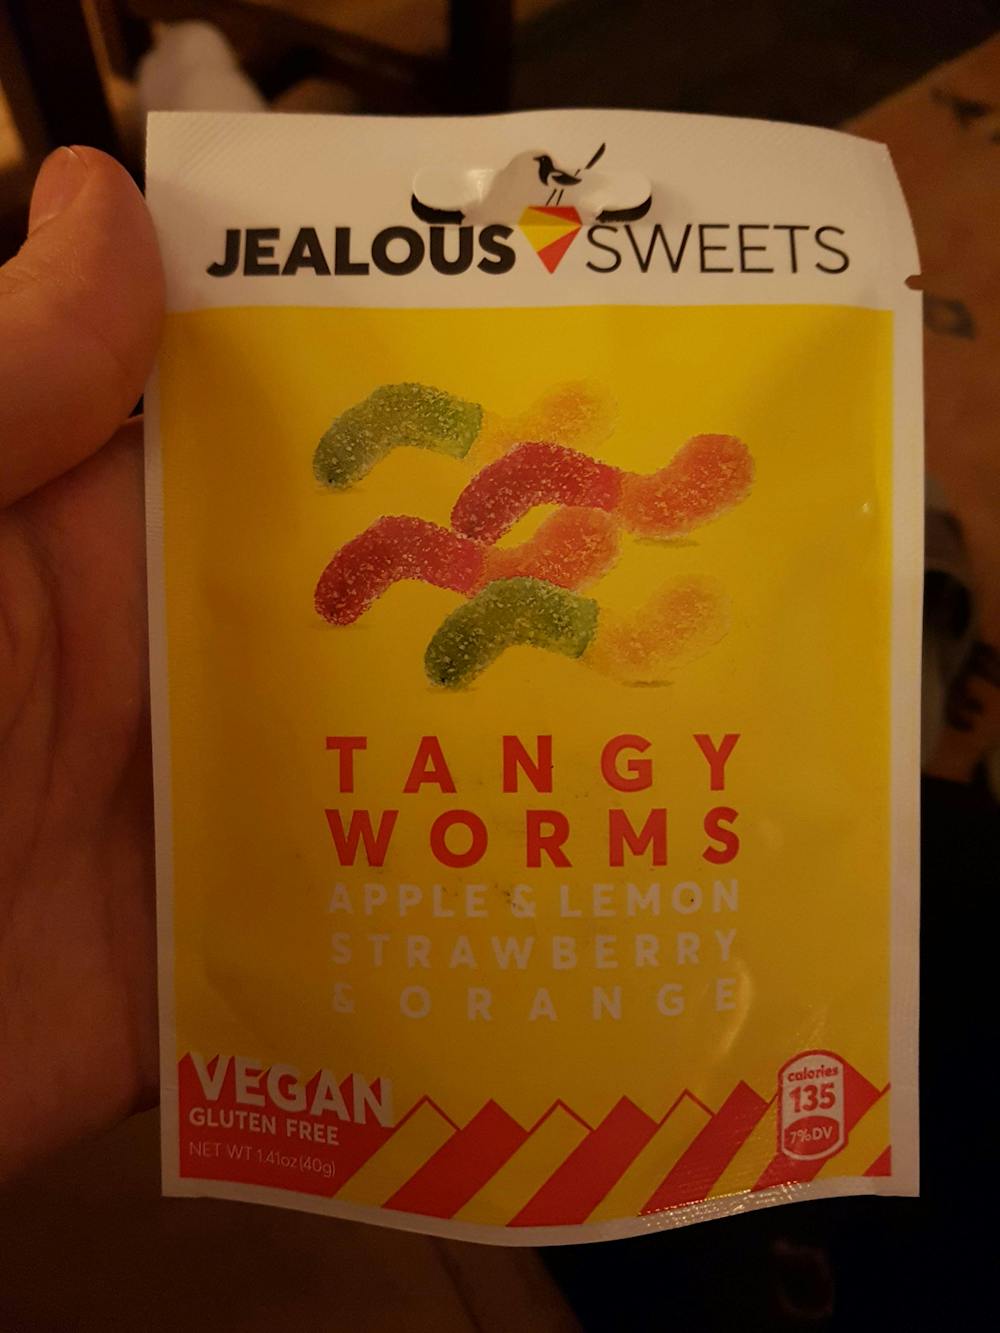 Tangy worms, Jealous sweets